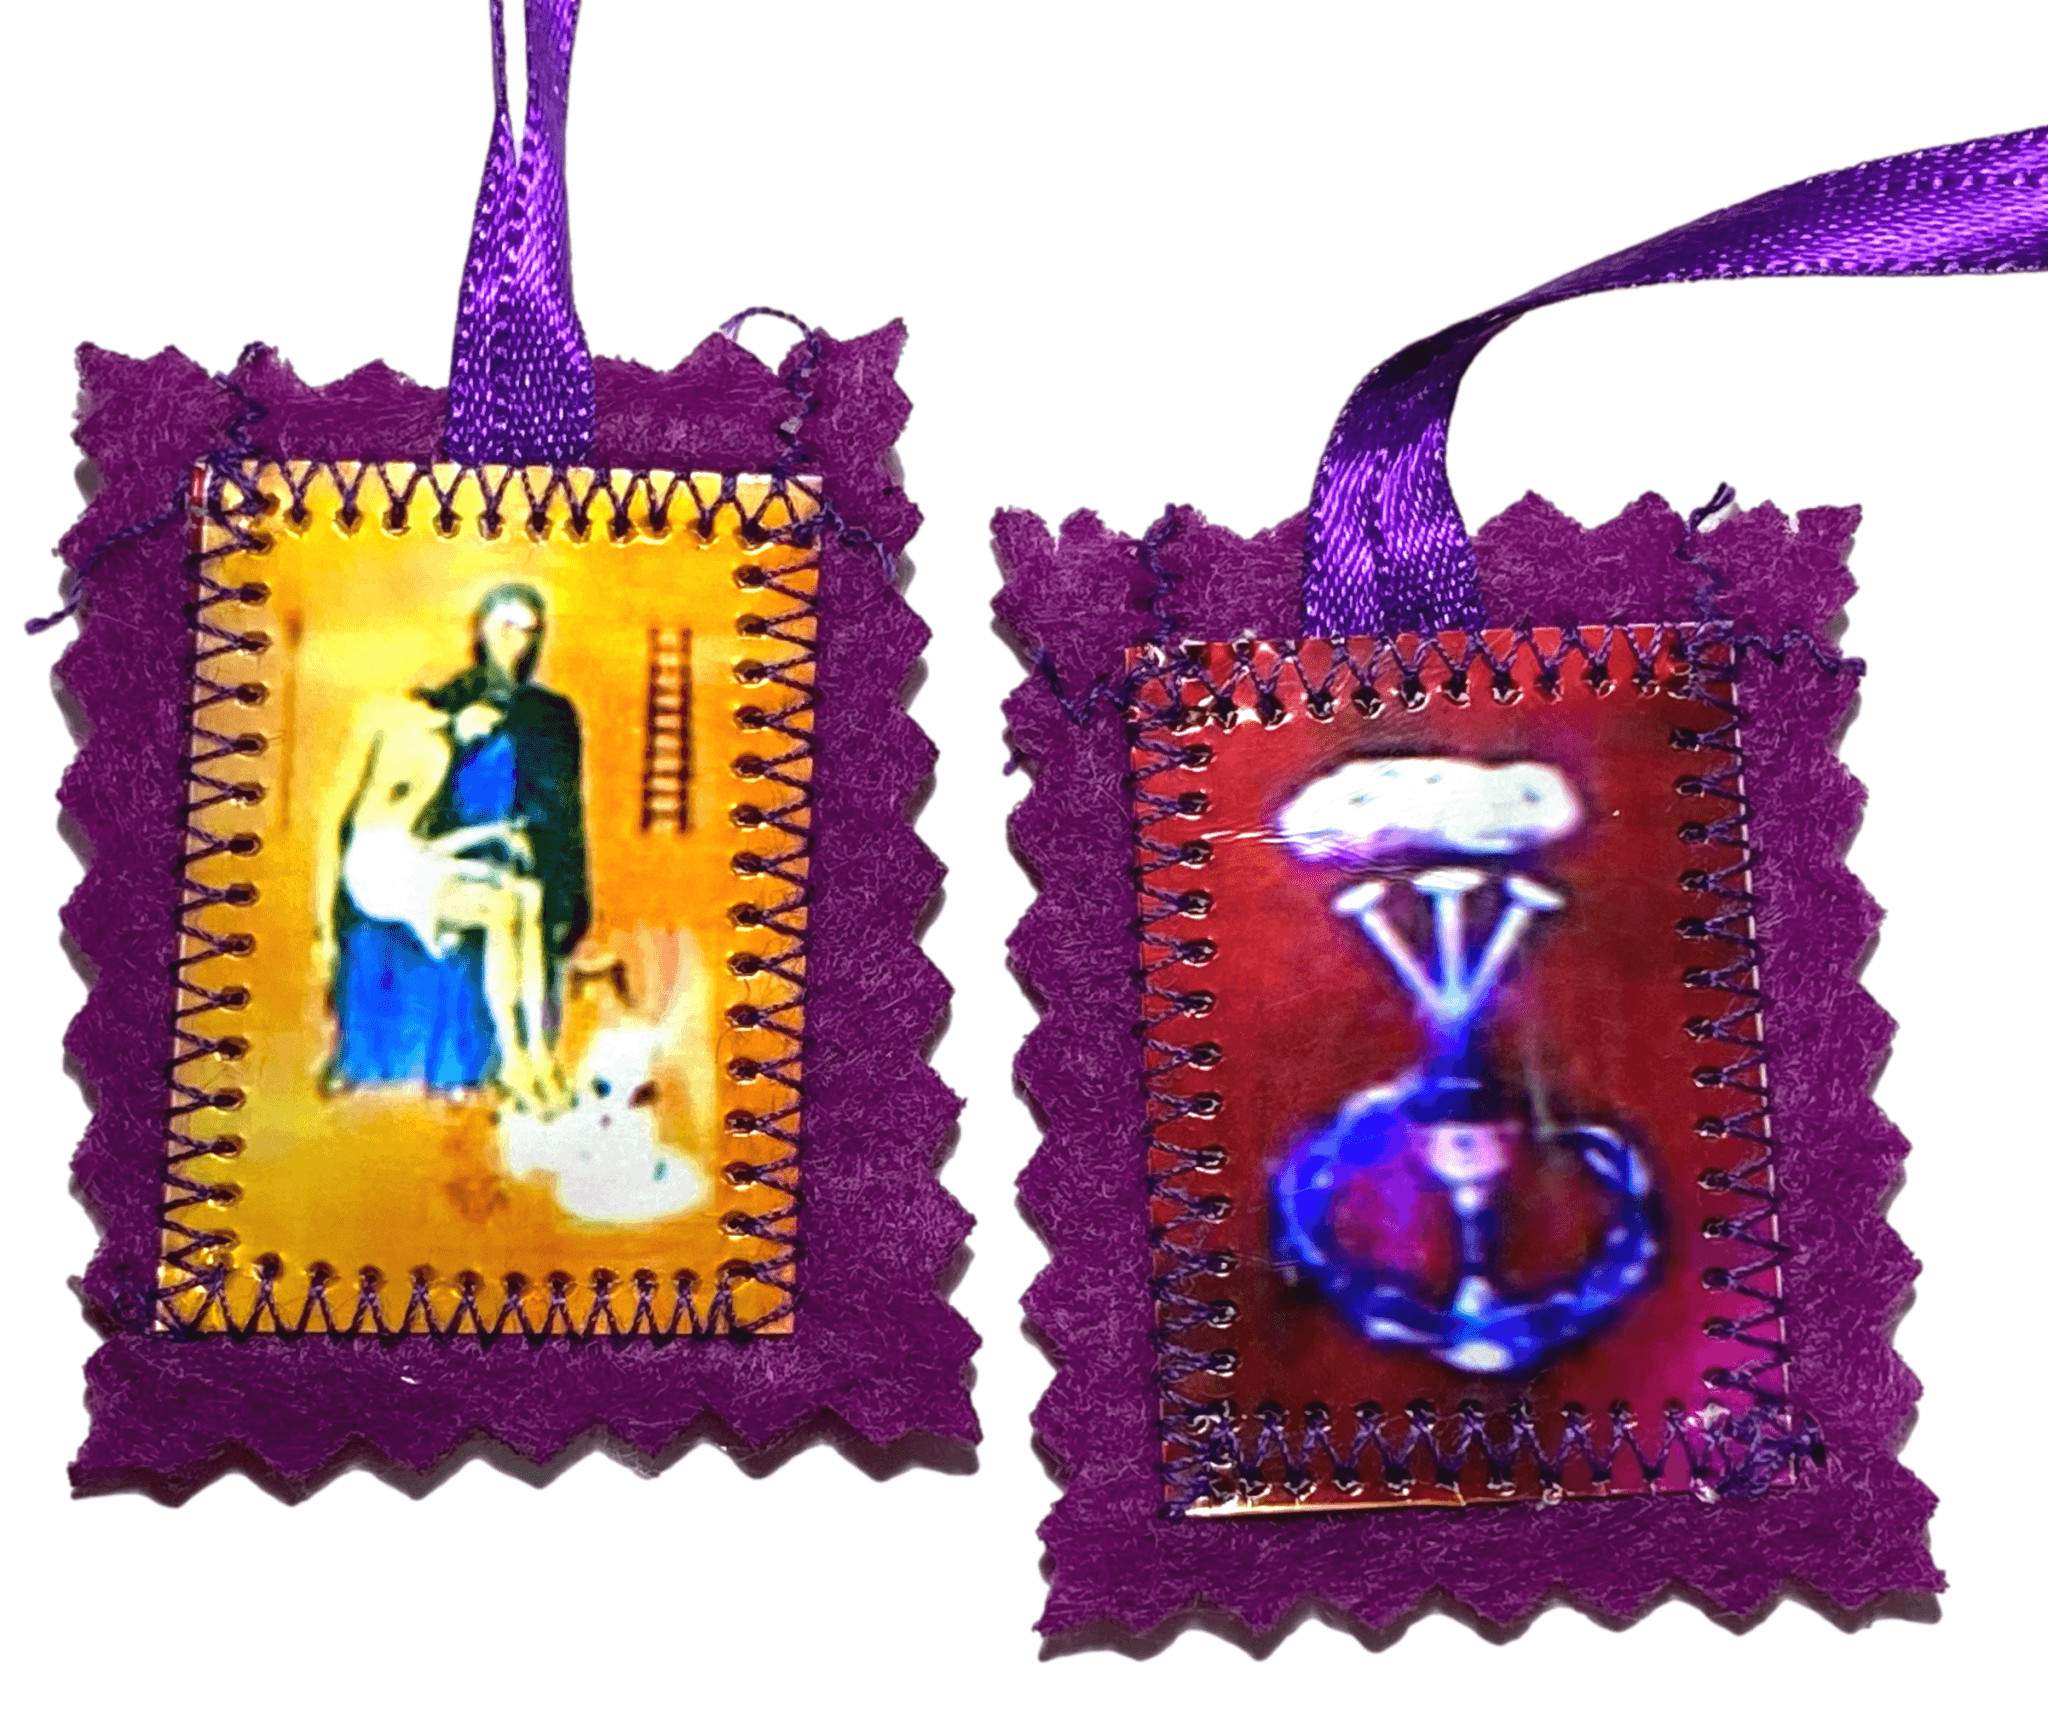 Scapular Marie Julie Jehenny Benediction and Protection Escapulario del Perdon Purple Satin Ribbon 1 3/4 L x 1 1/2 W inches - Ysleta Mission Gift Shop- VOTED El Paso's Best Gift Shop